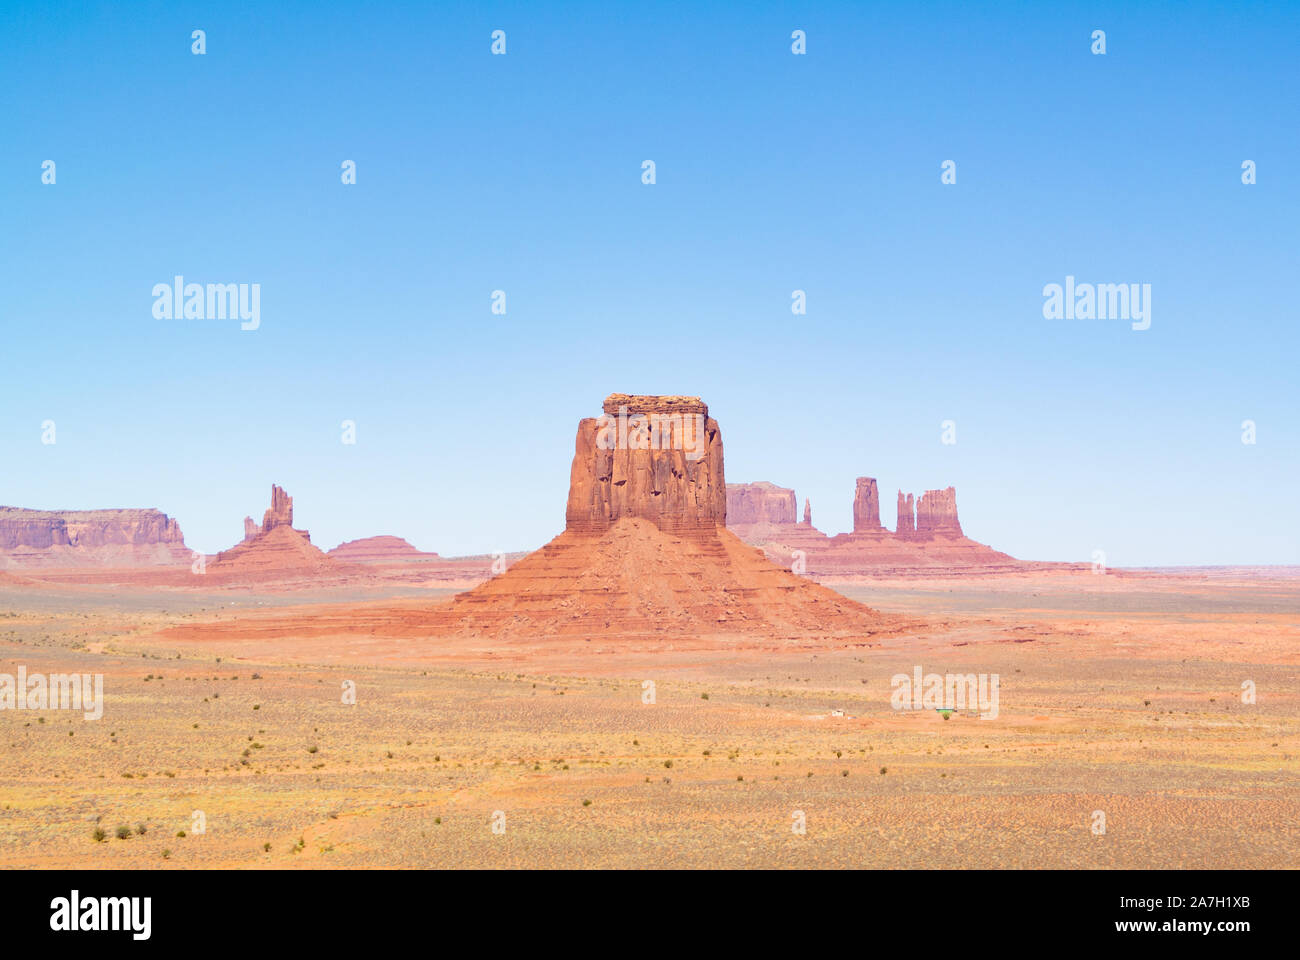 Landscape with buttes in Monument Valley, Utah, united states of america Stock Photo